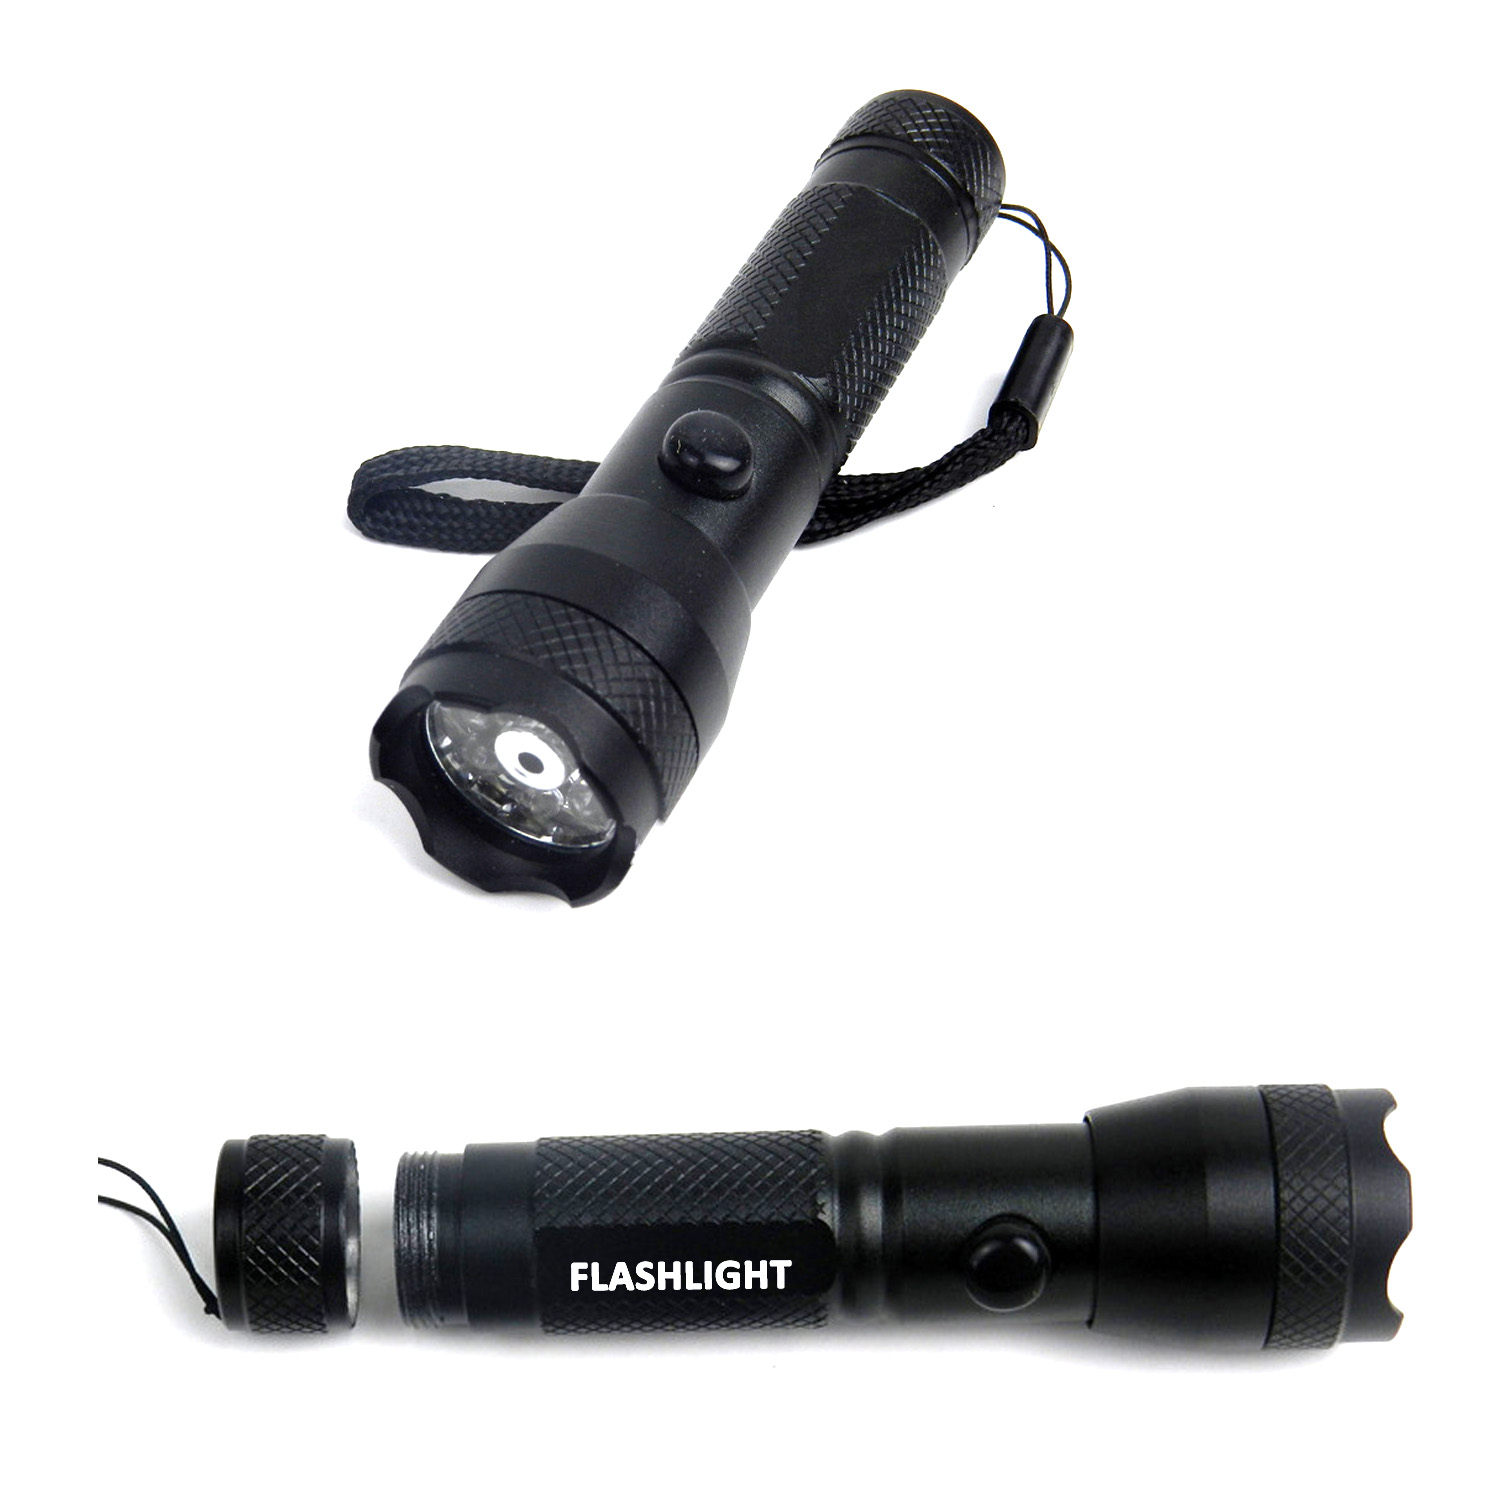 Seven LED and One Laser Flashlight